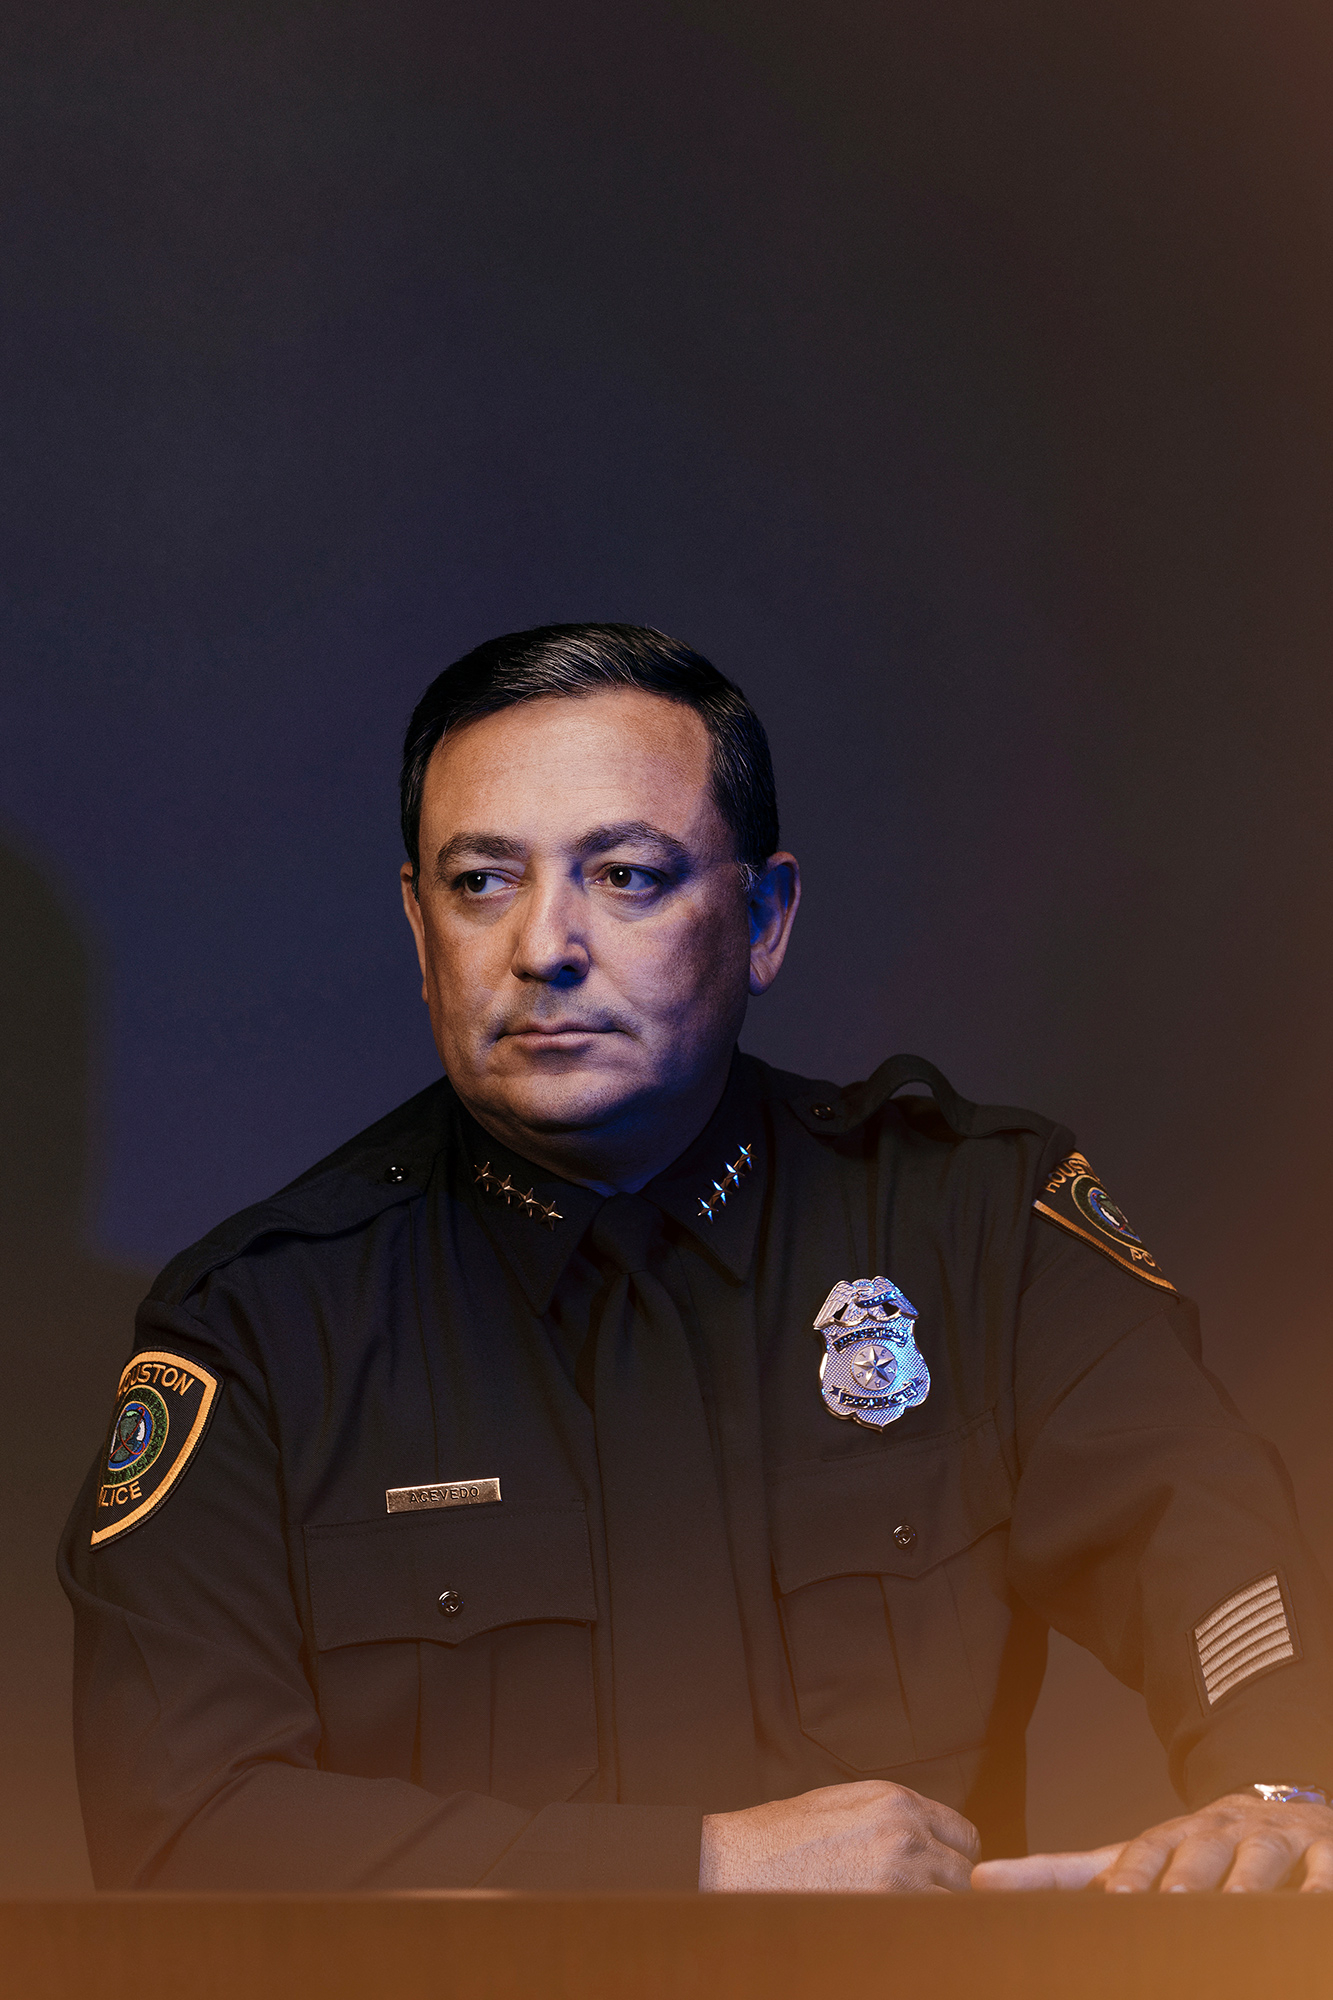 Art Acevado, Houston police chief, photographed at the HPD headquarters in downtown Houston, Texas by photographer, Todd Spoth.